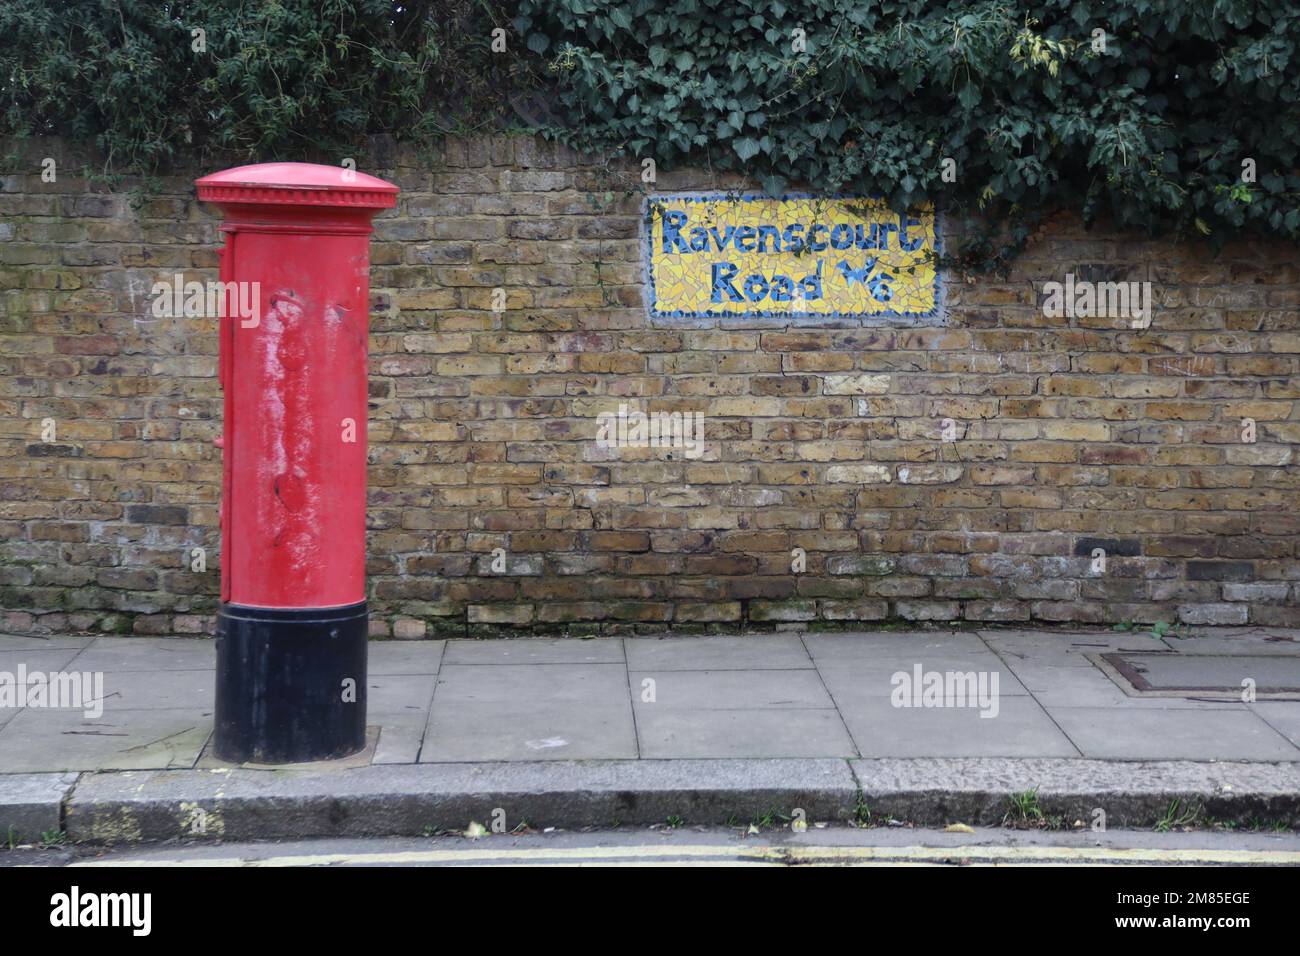 Red Royal Mail postbox and mosaic sign for Ravenscourt Road. Stock Photo